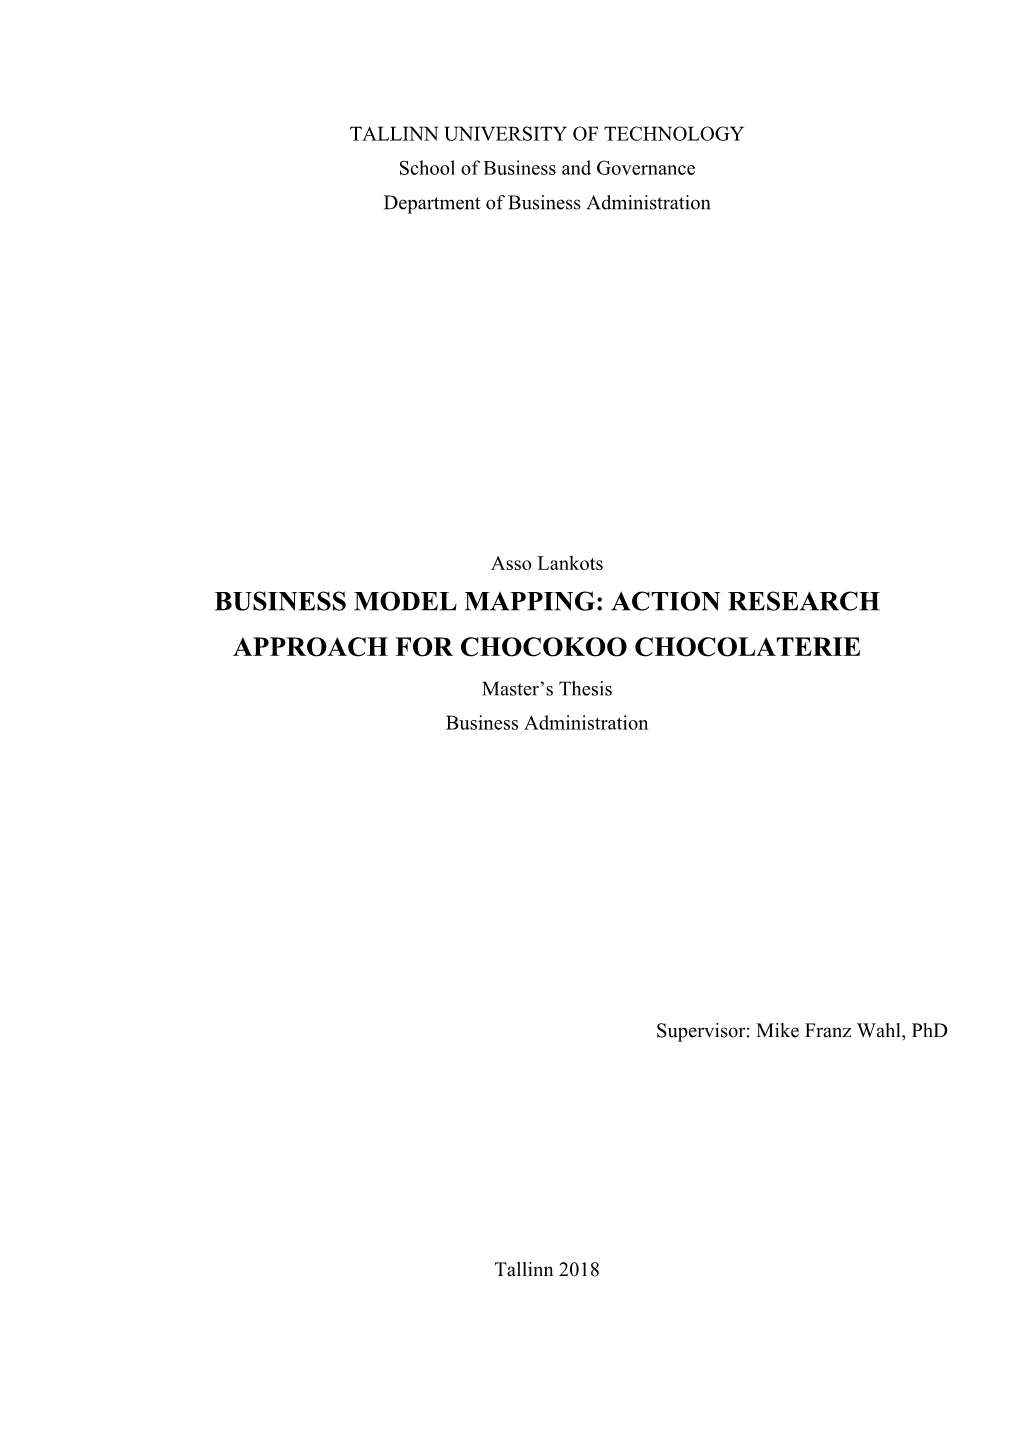 BUSINESS MODEL MAPPING: ACTION RESEARCH APPROACH for CHOCOKOO CHOCOLATERIE Master’S Thesis Business Administration